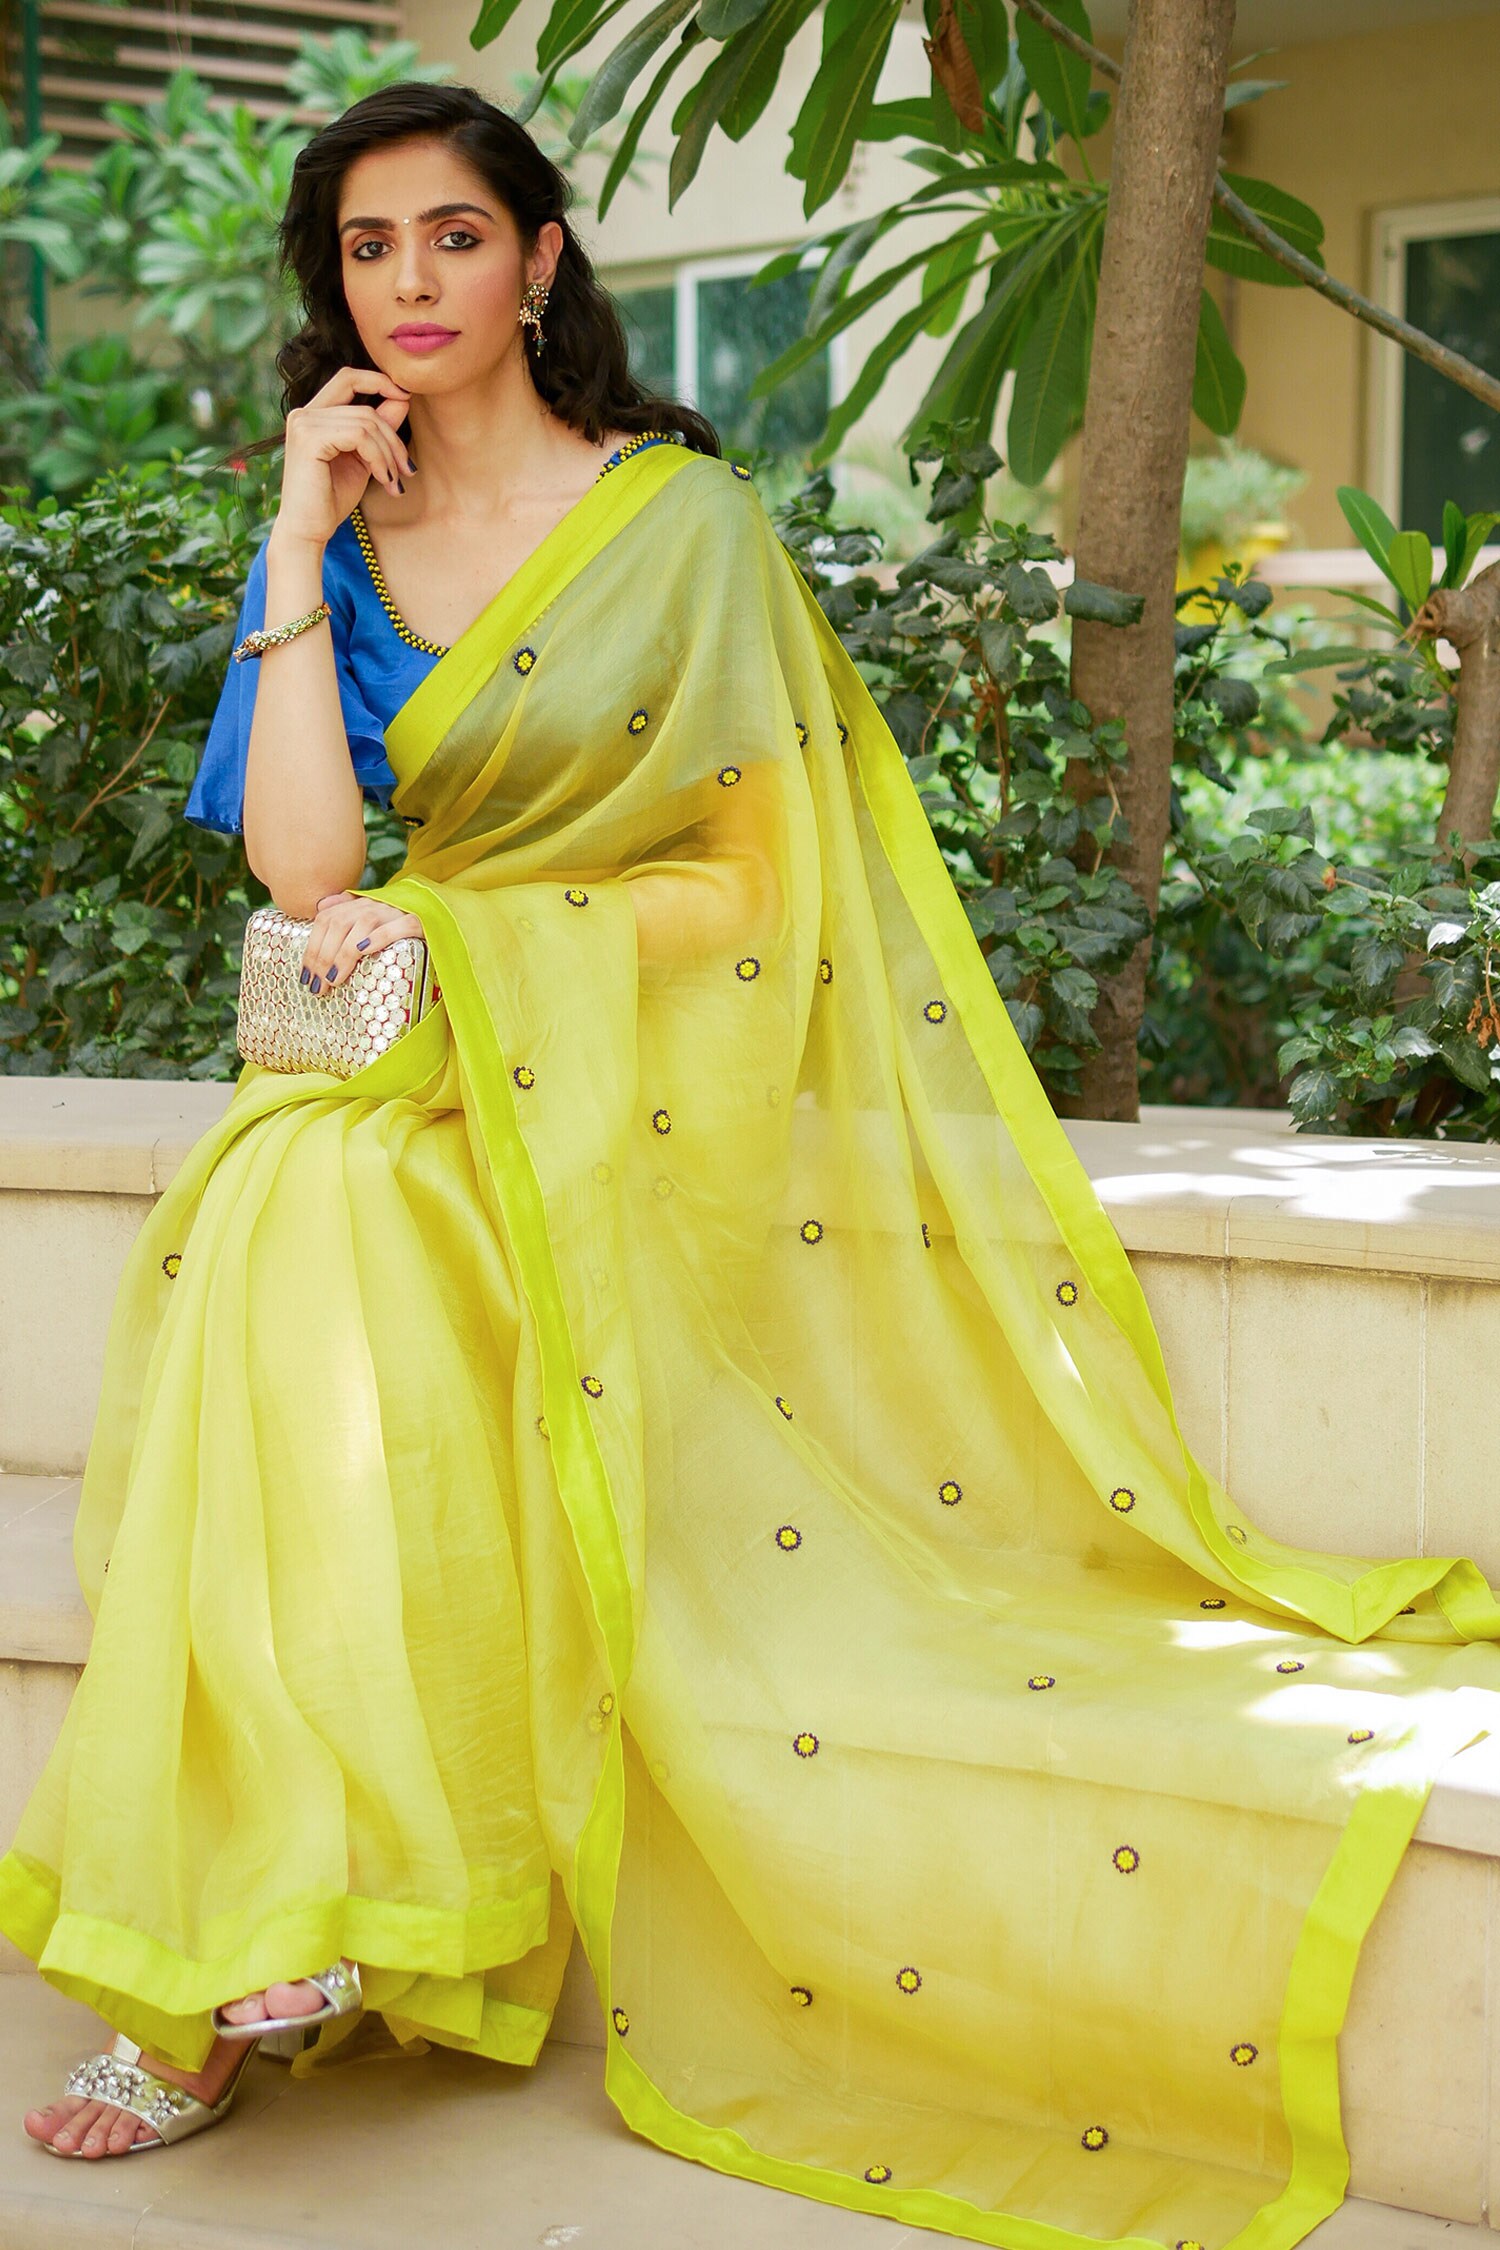 Embroidered Organza Yellow Saree with Blouse - SR24260